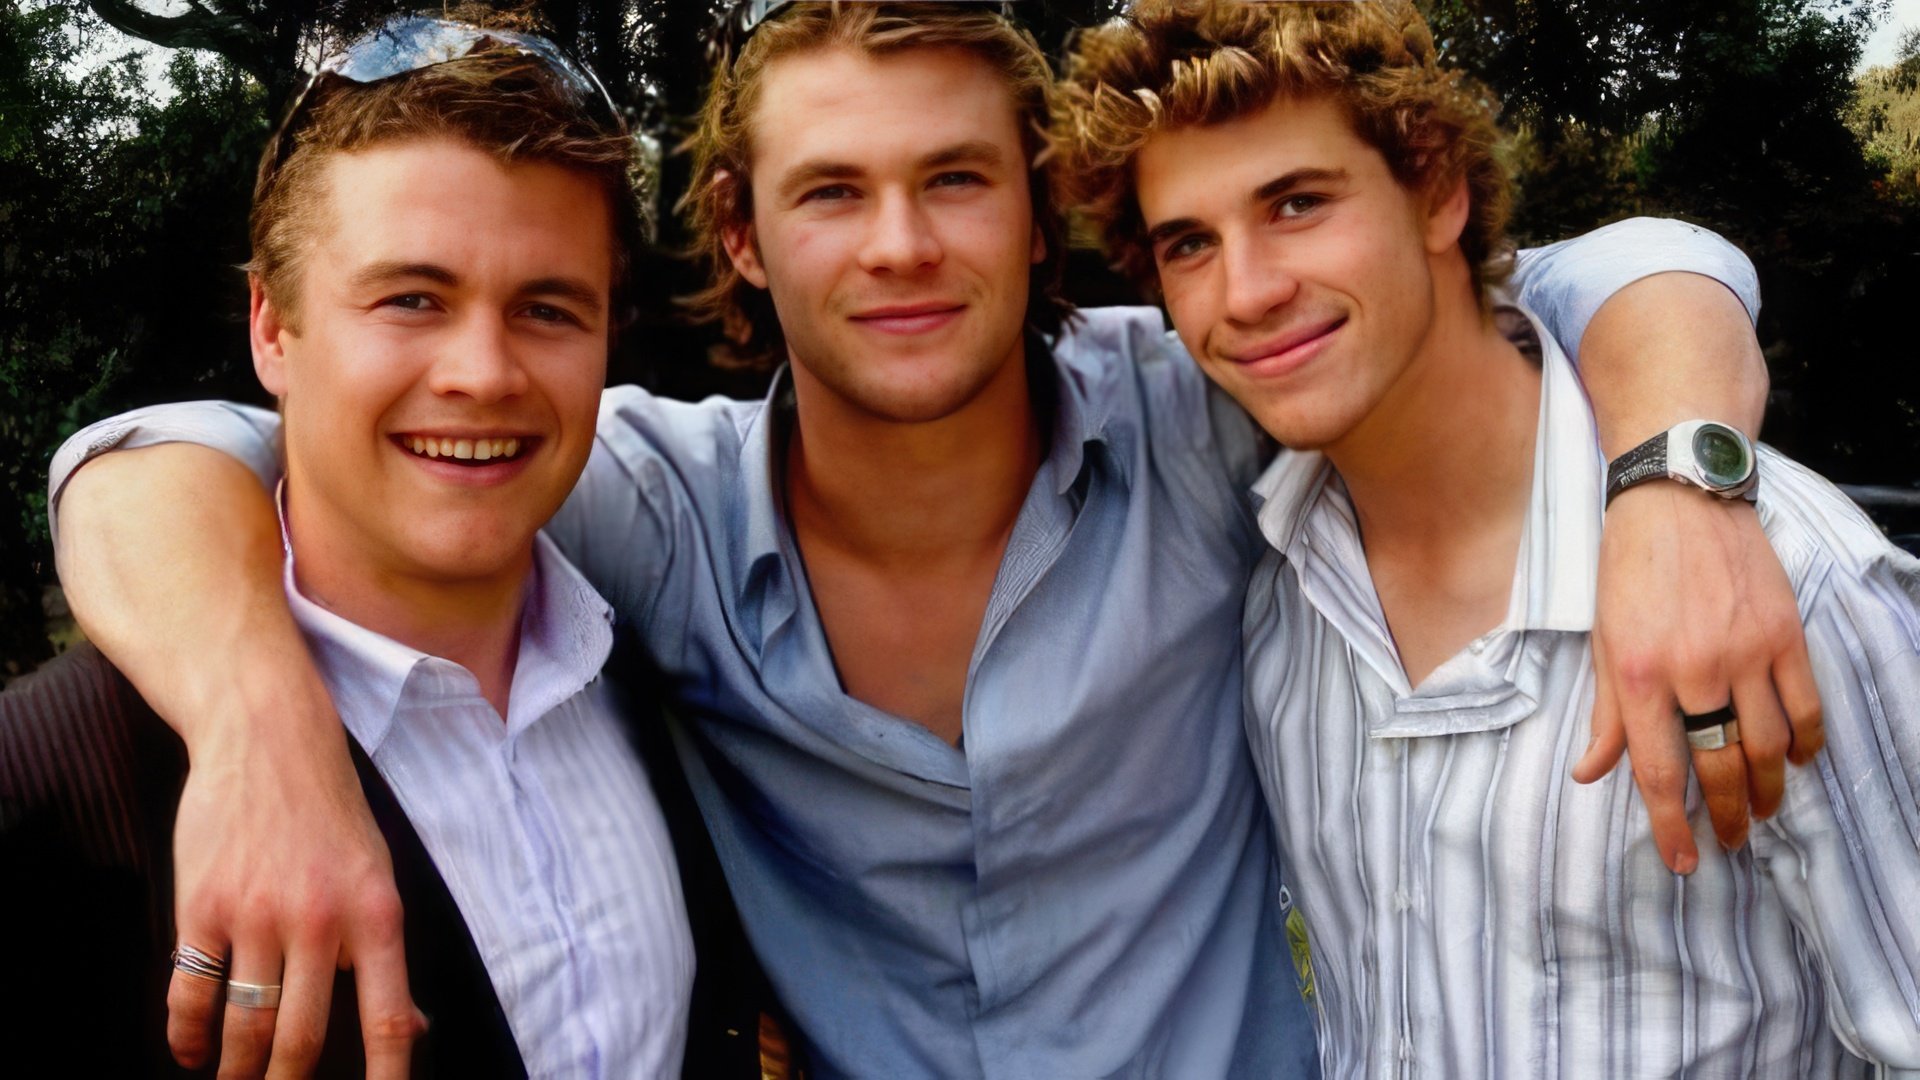 All of the Hemsworth brothers became actors (Chris is in the middle)